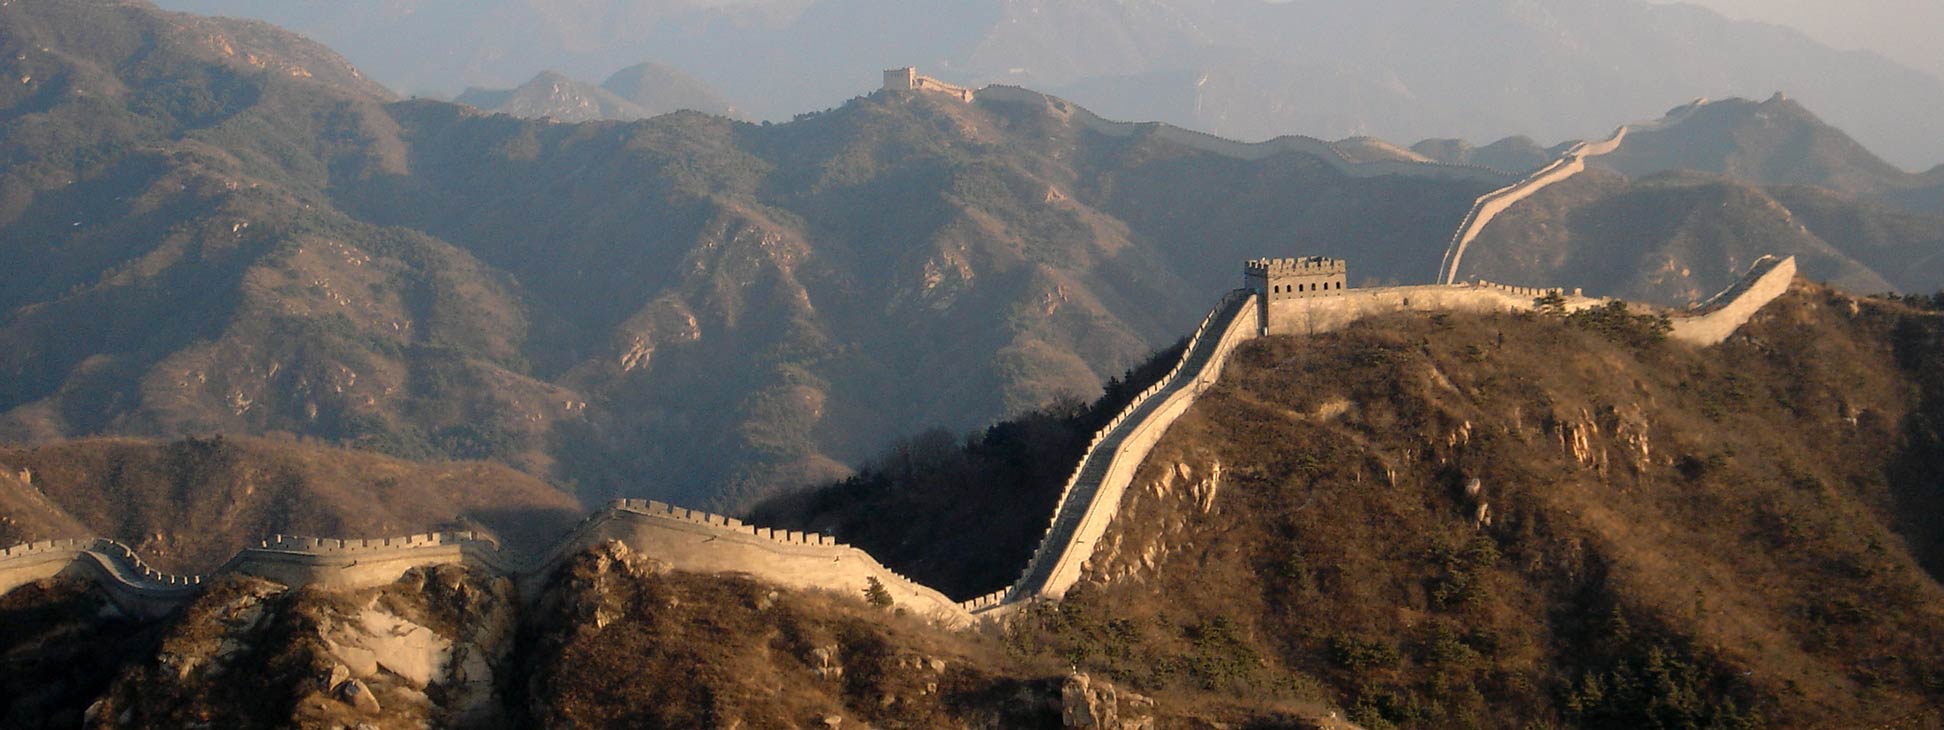 The Great Wall of China is a well known landmark in the Middle Kingdom.